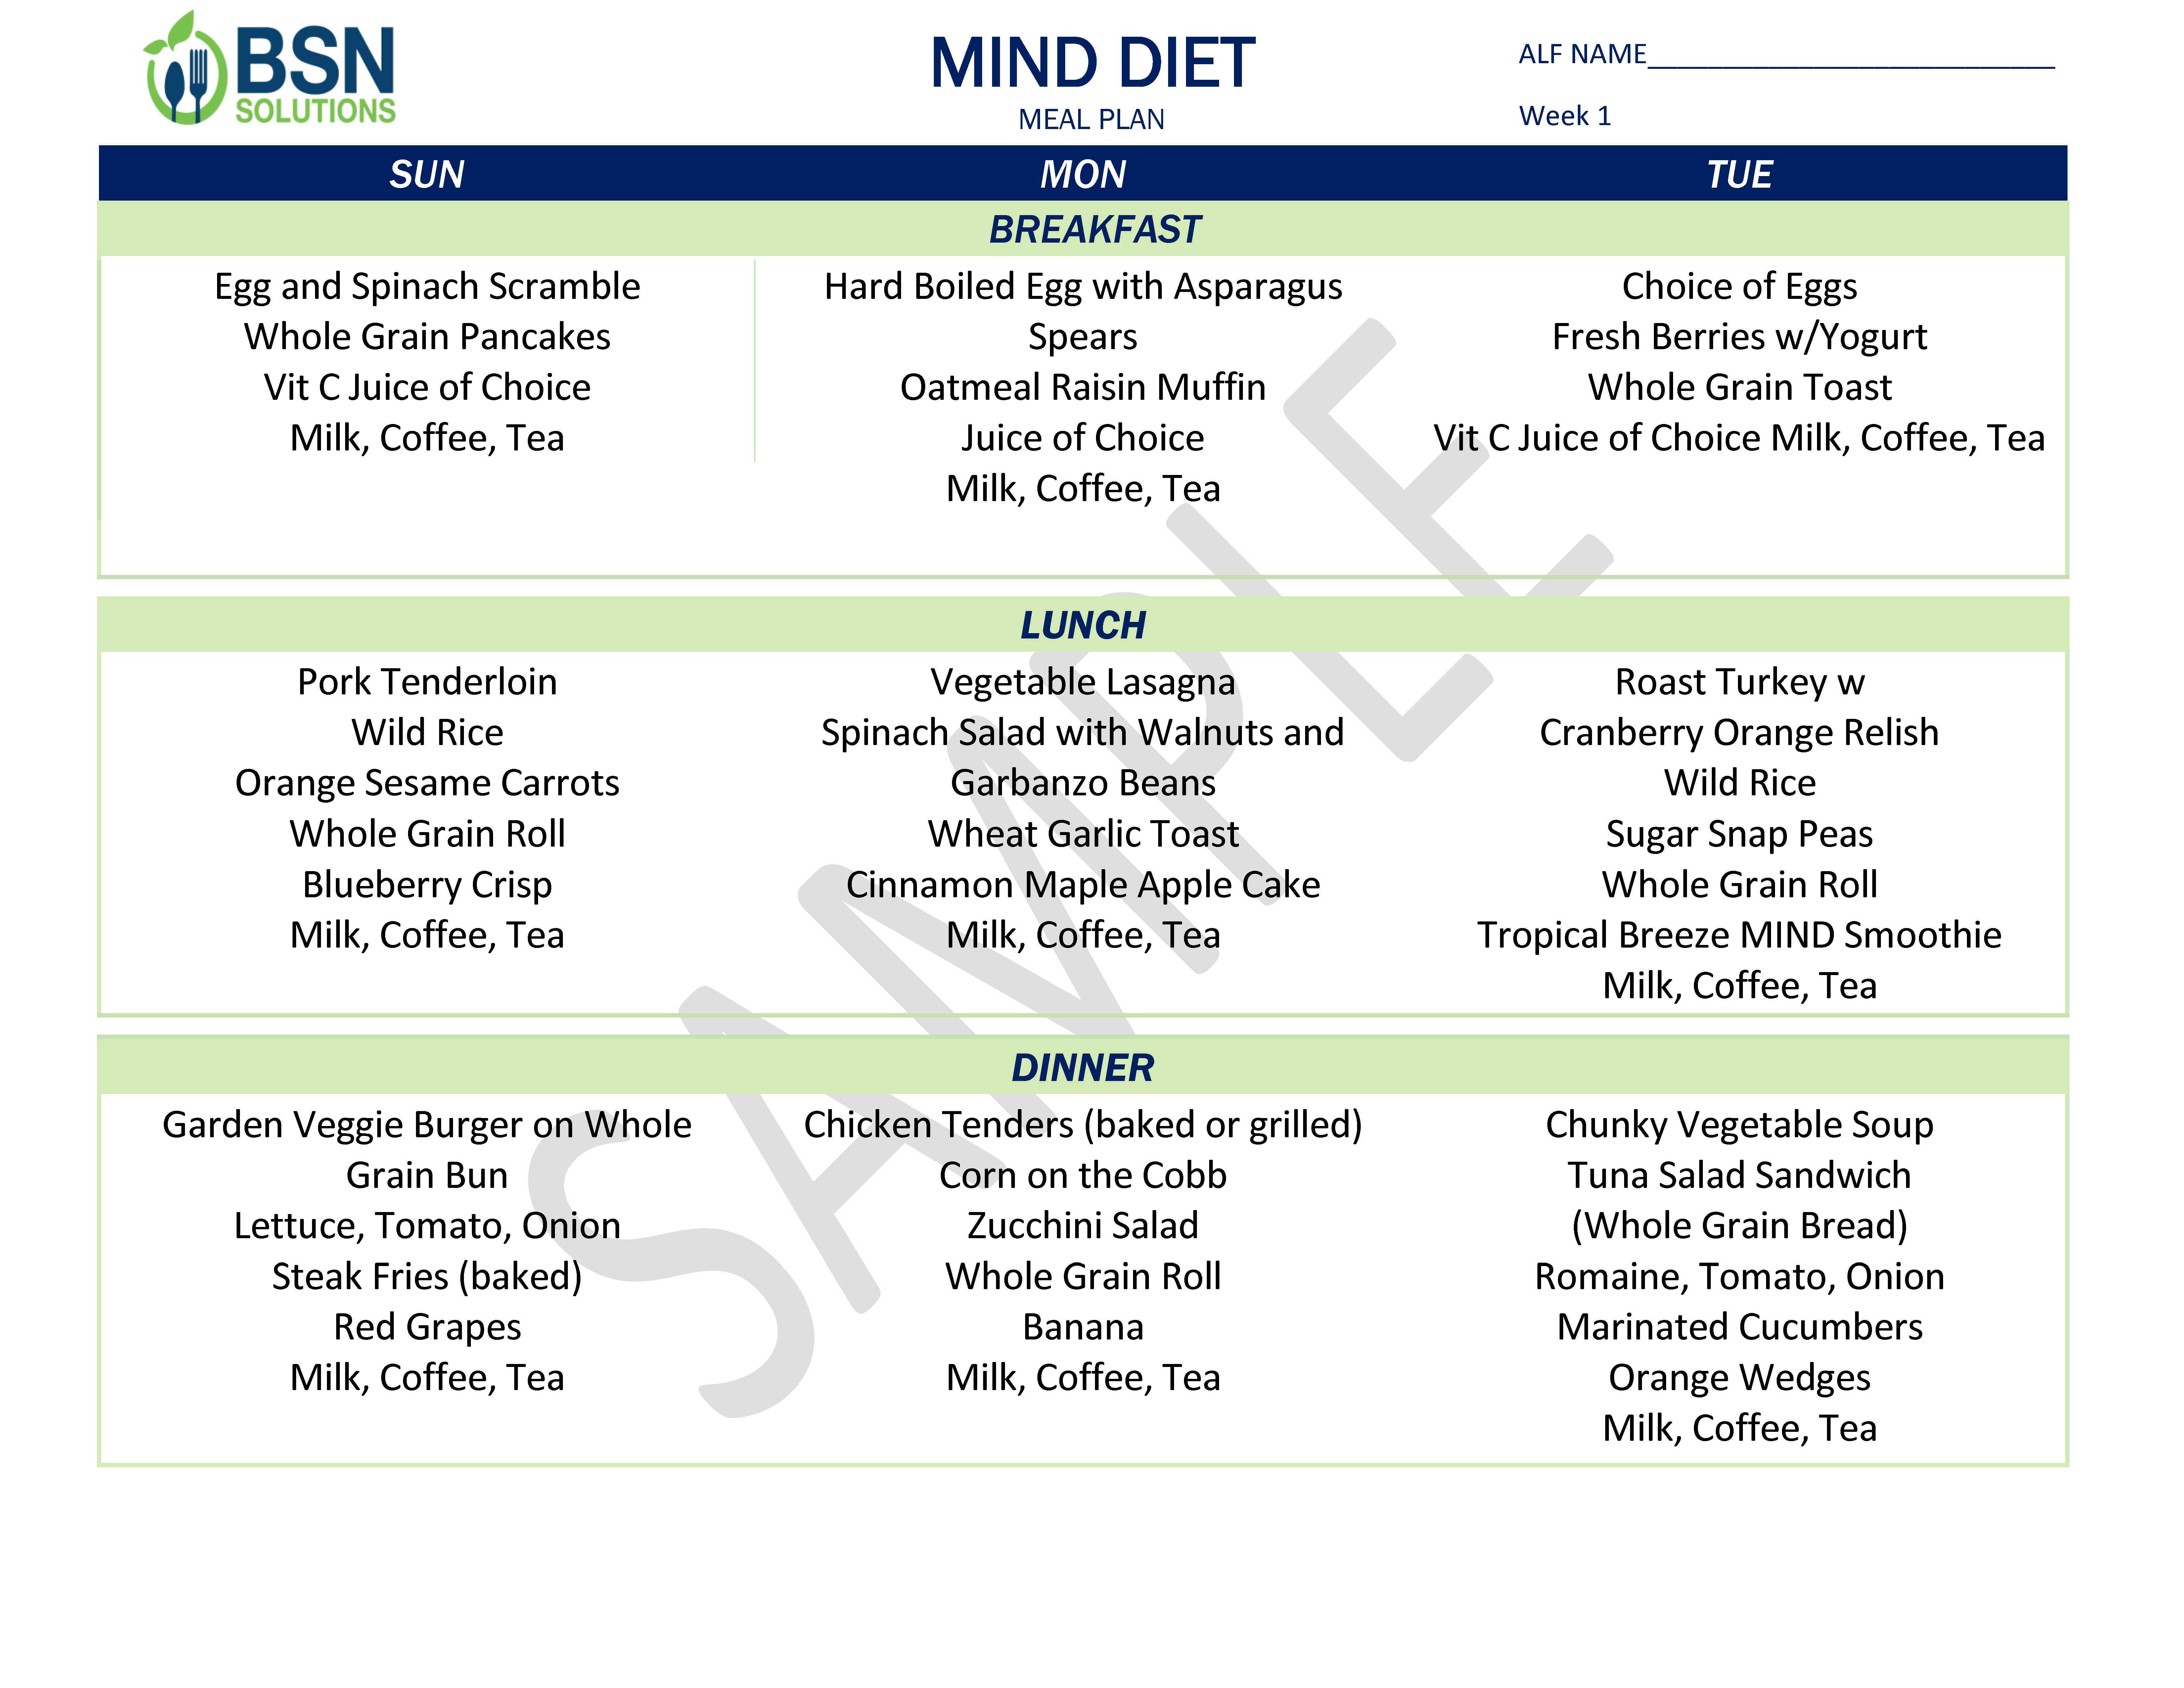 The Mind Diet Menu with Free Resource Library Membership